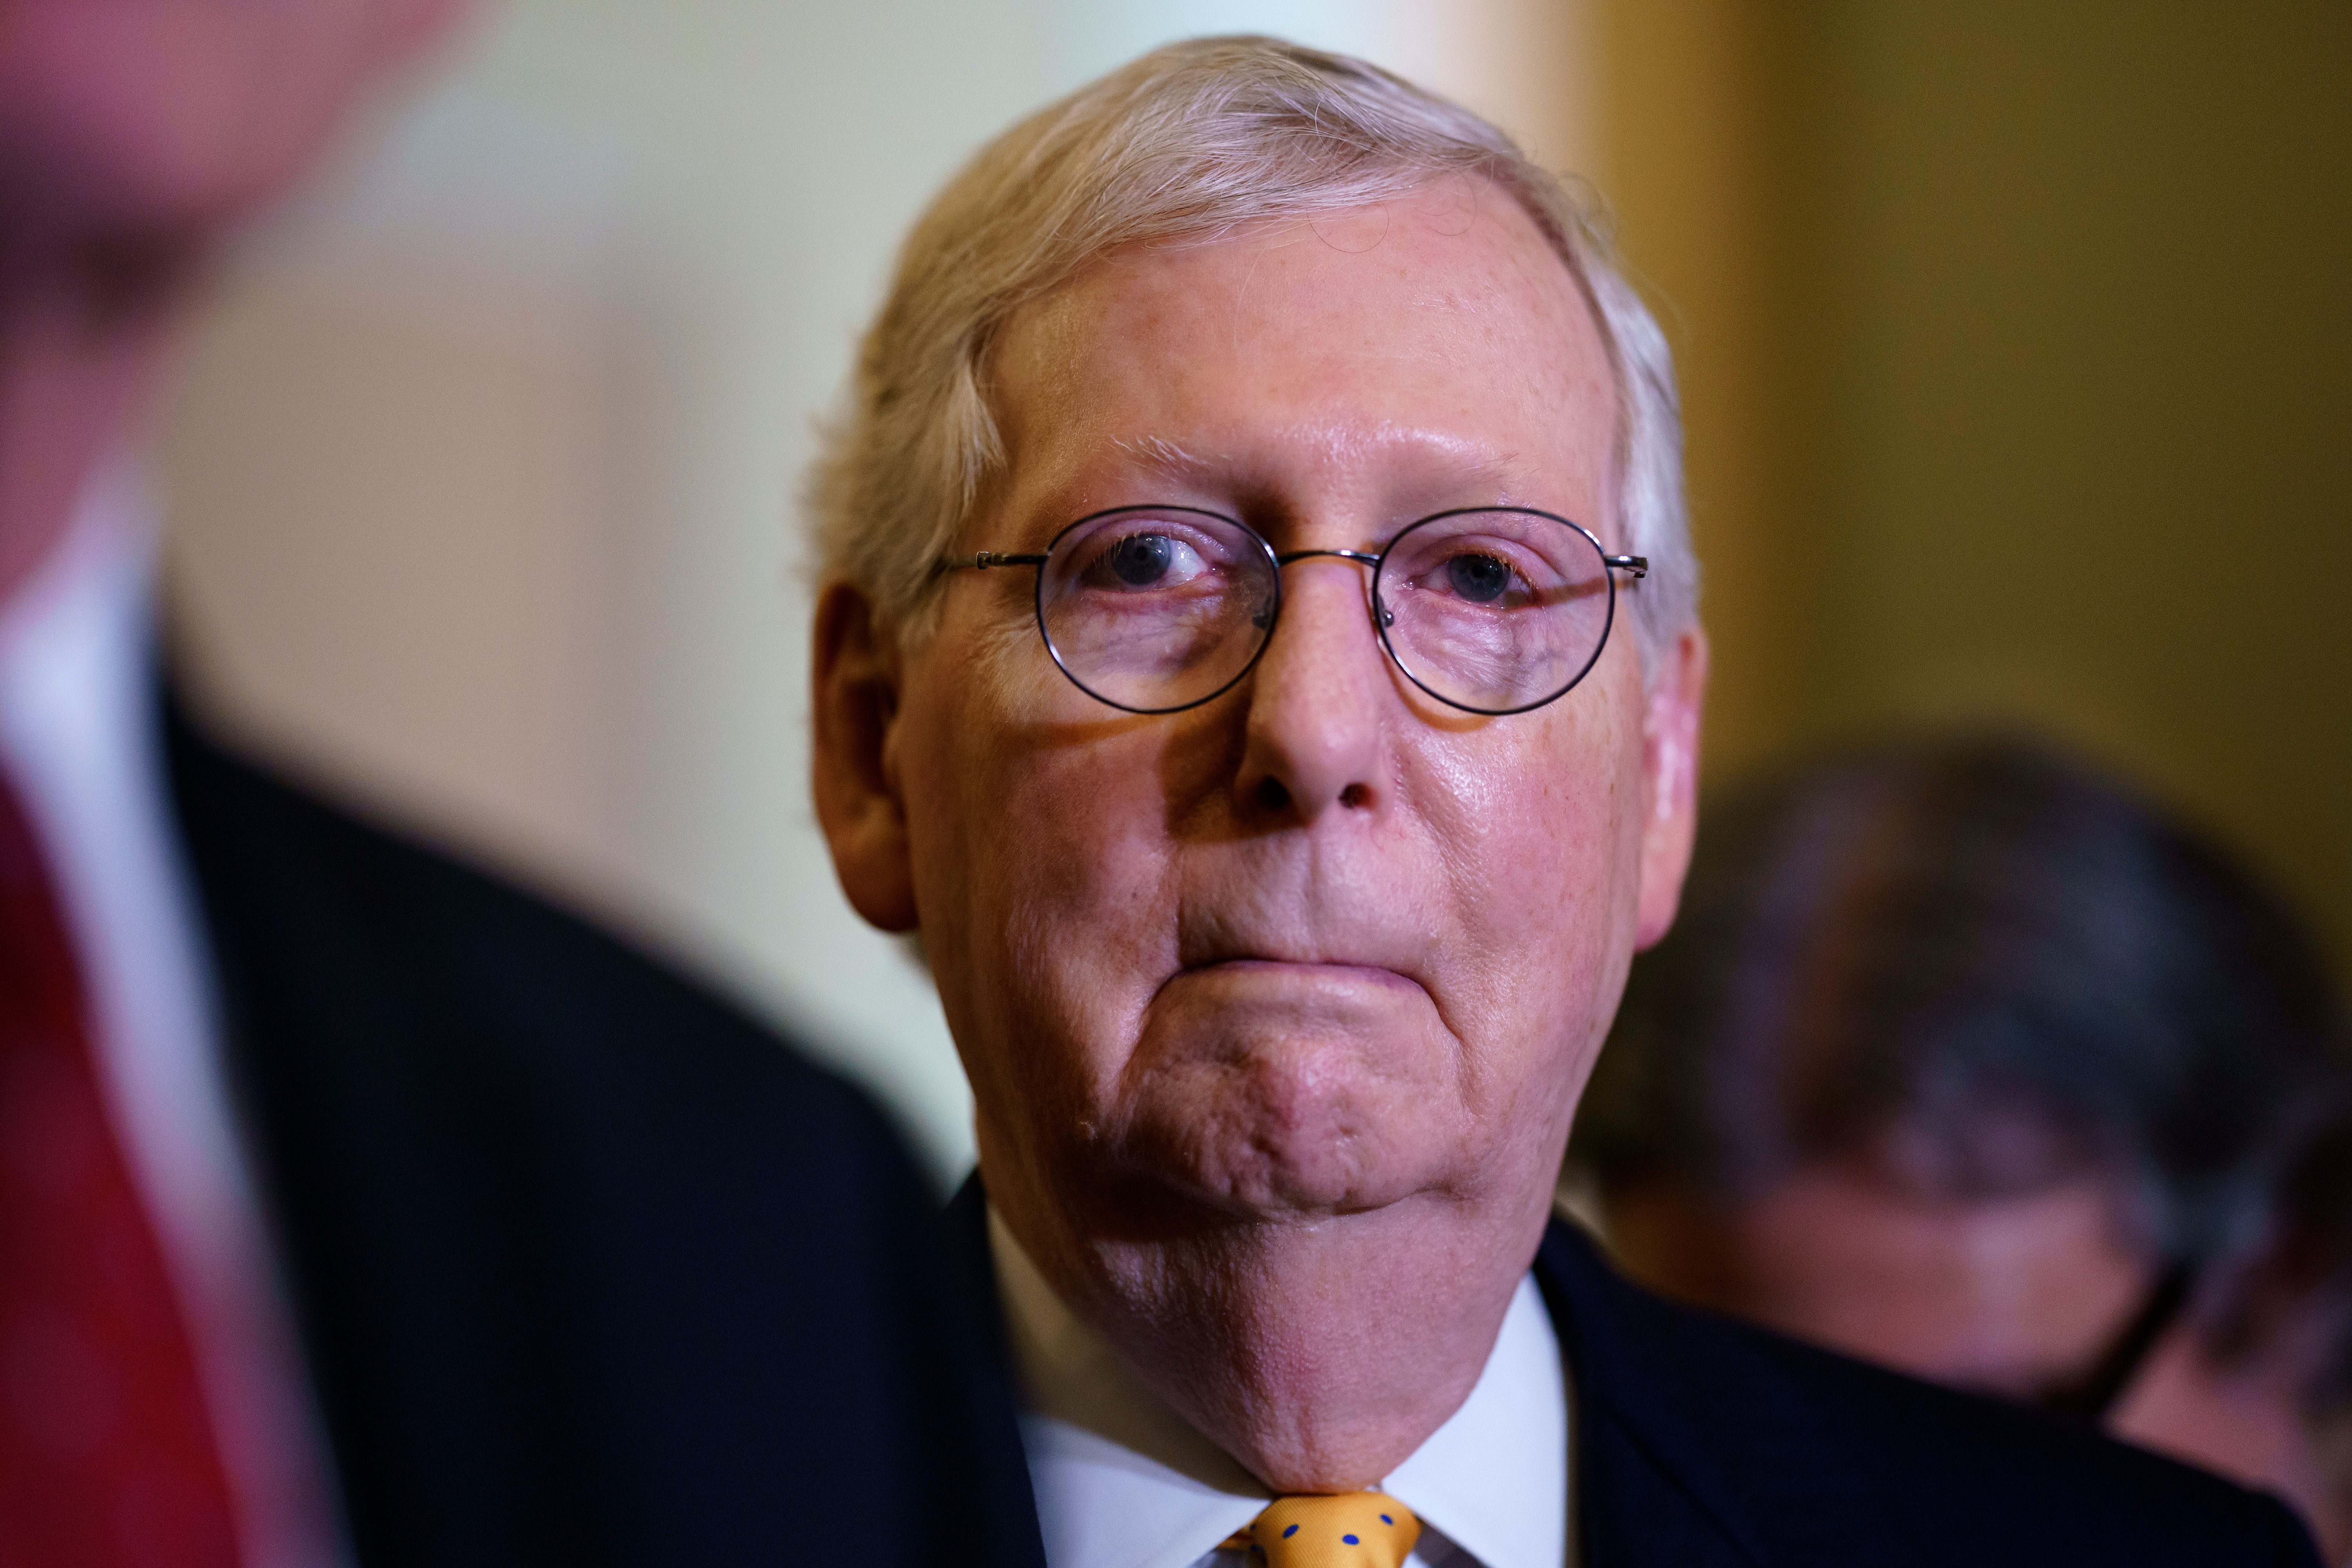 Senate Republican Leader Mitch McConnell listens during a news conference with reporters at the US Capitol in Washington, DC, on July 27, 2021.